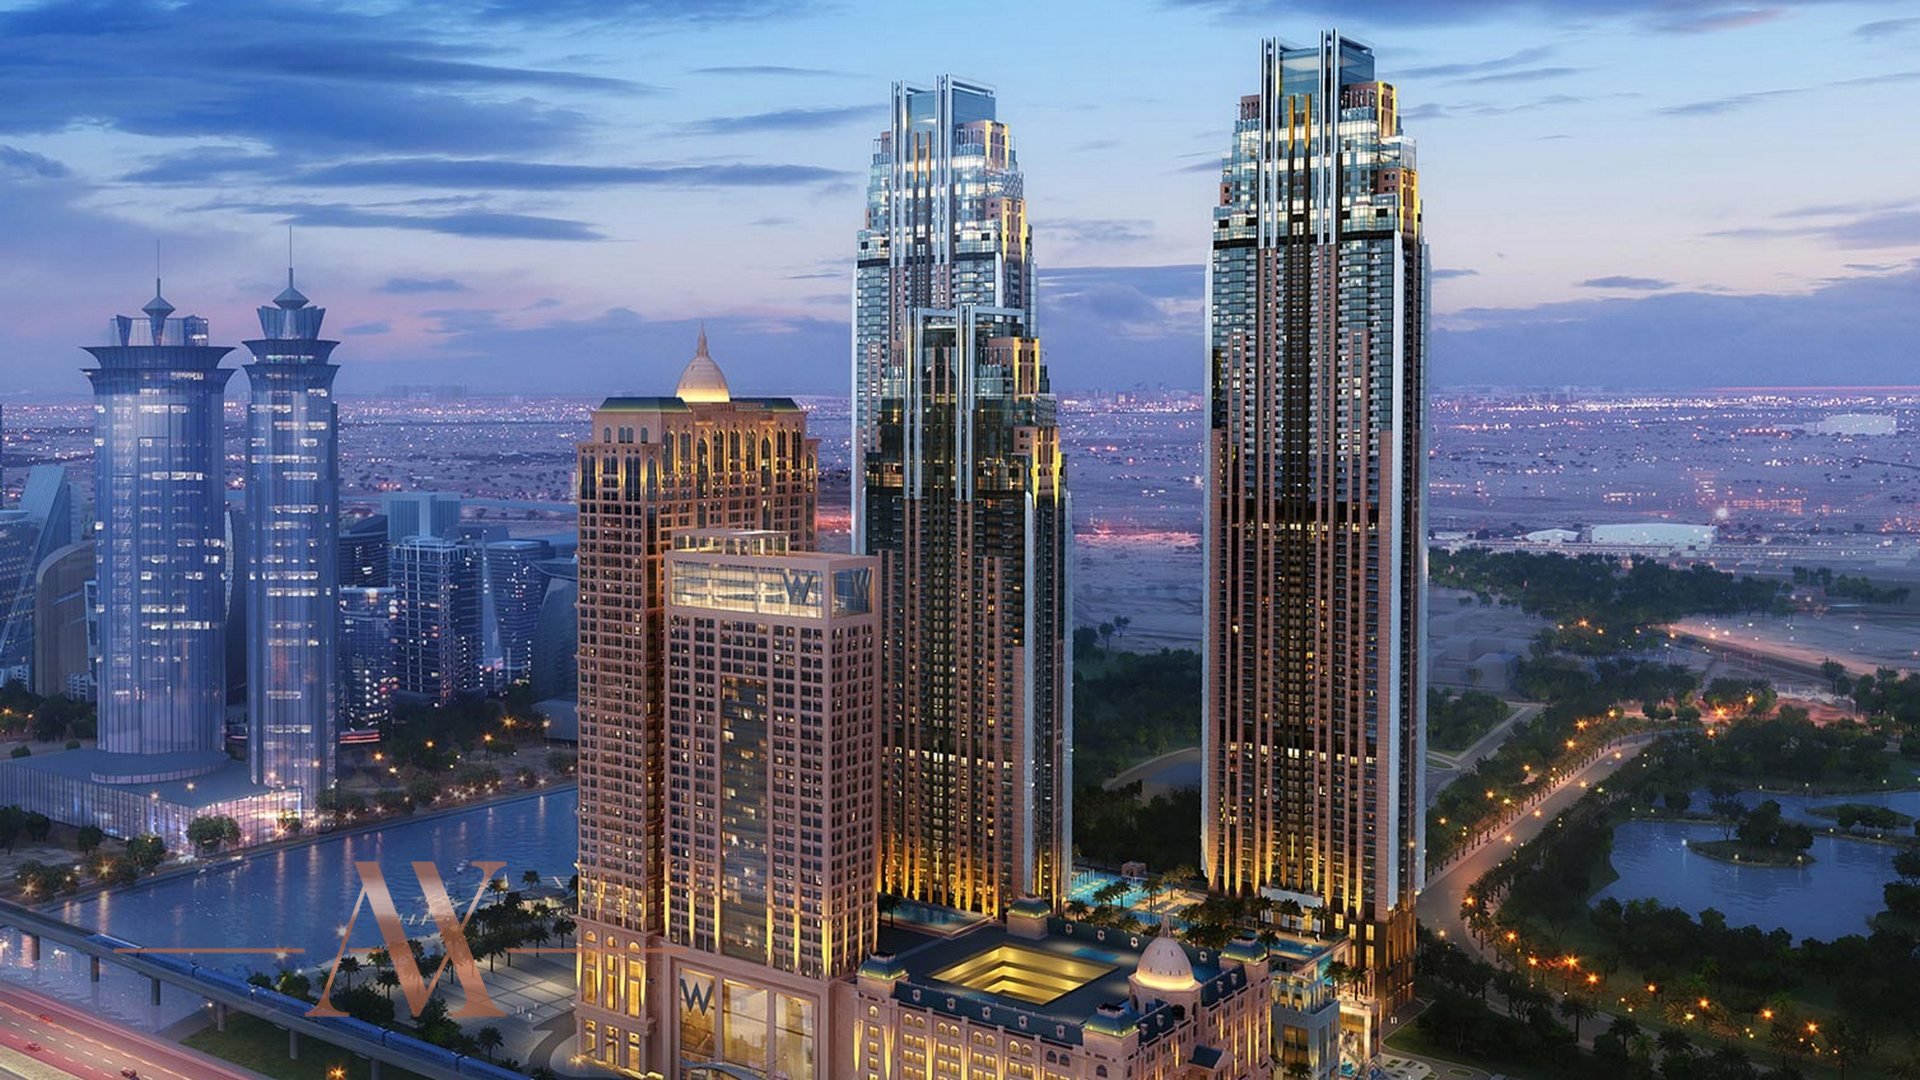 AL HABTOOR CITY property for sale with Bitcoin & Cryptocurrency - photo 1